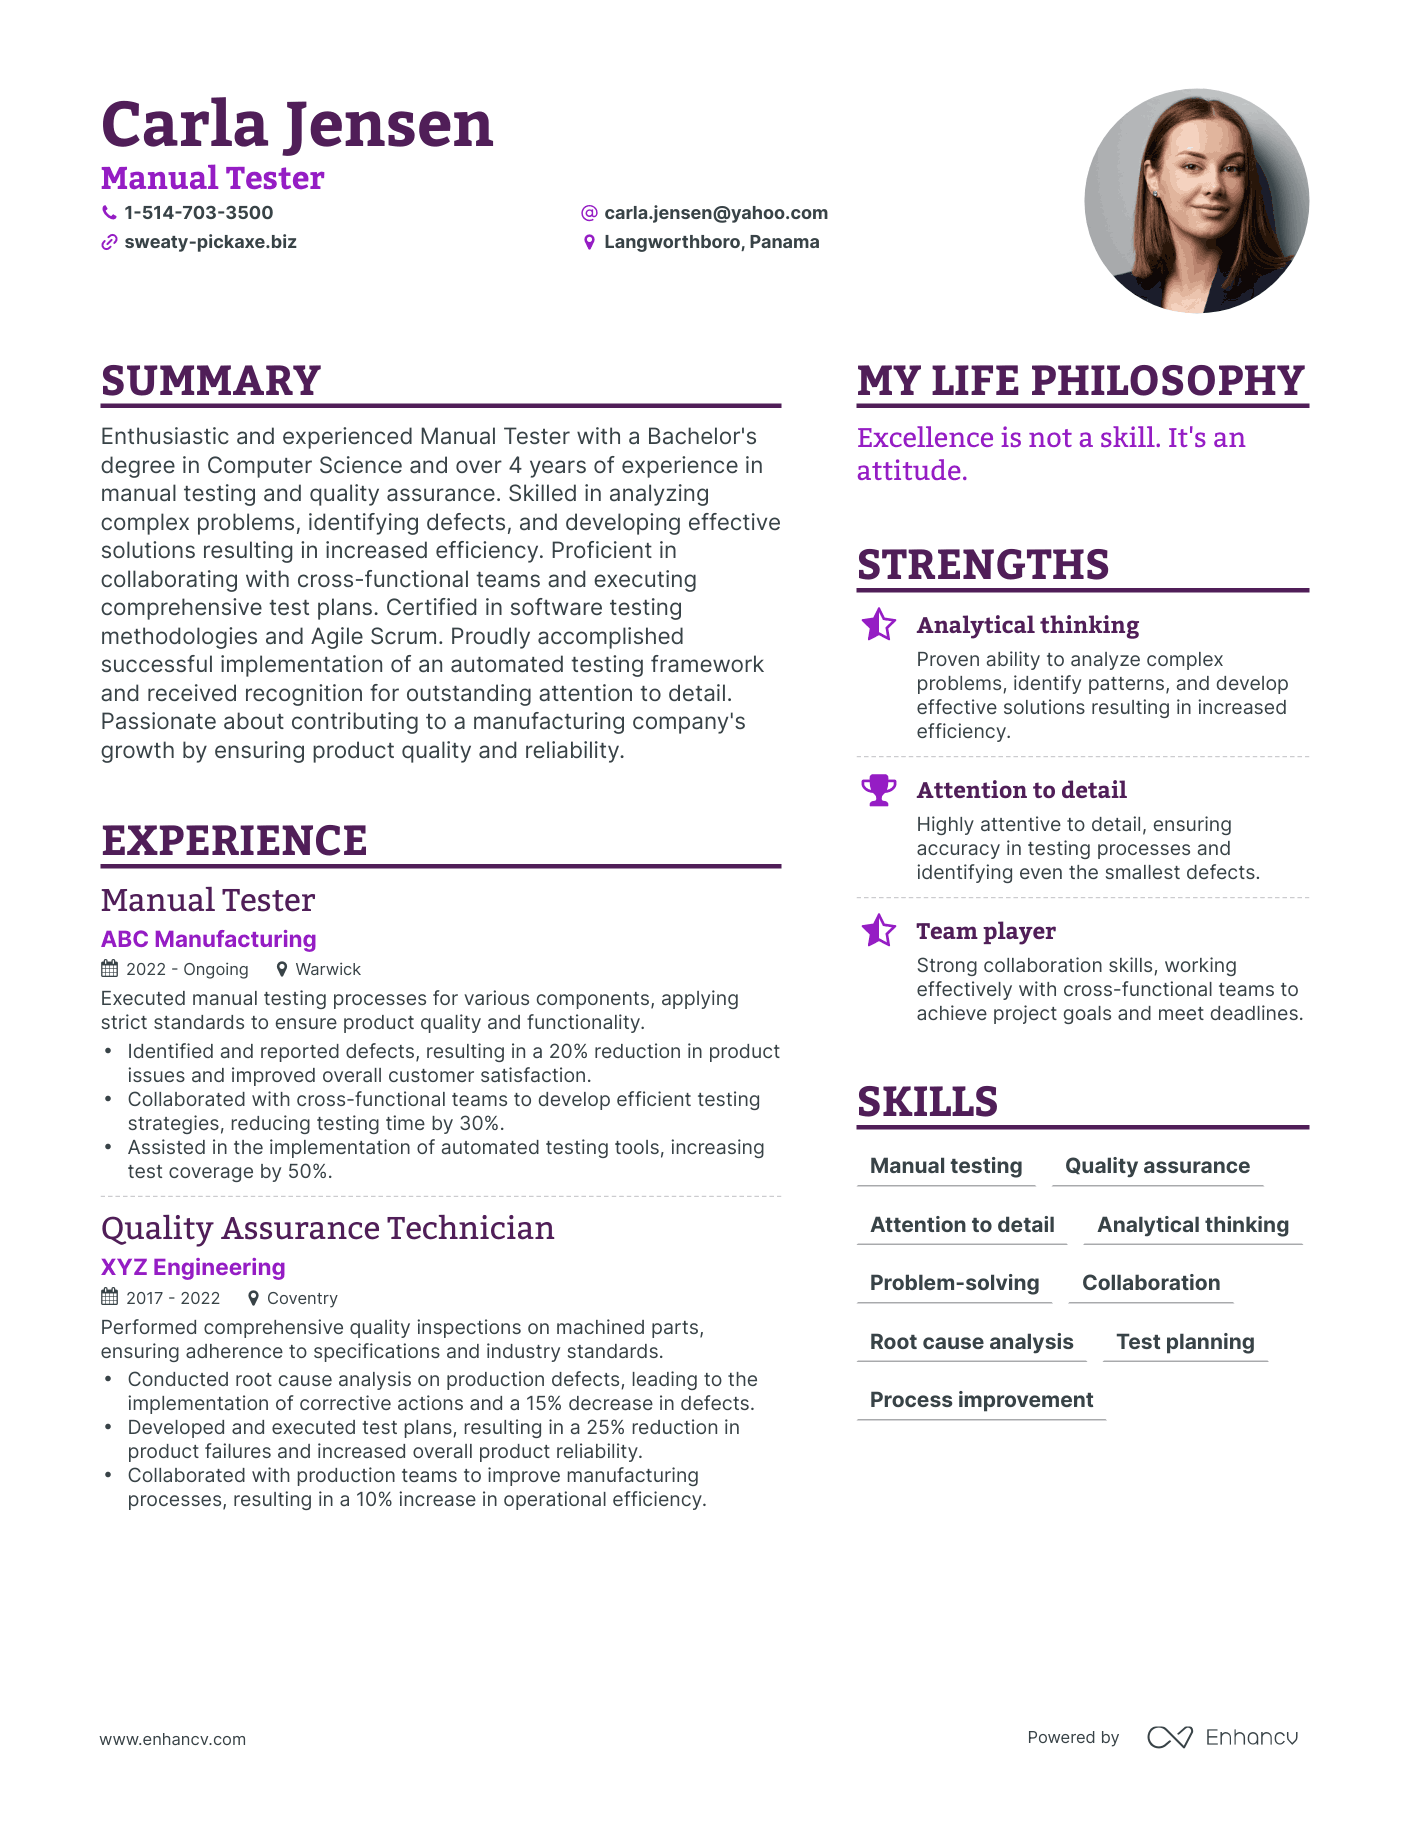 Manual Tester resume example